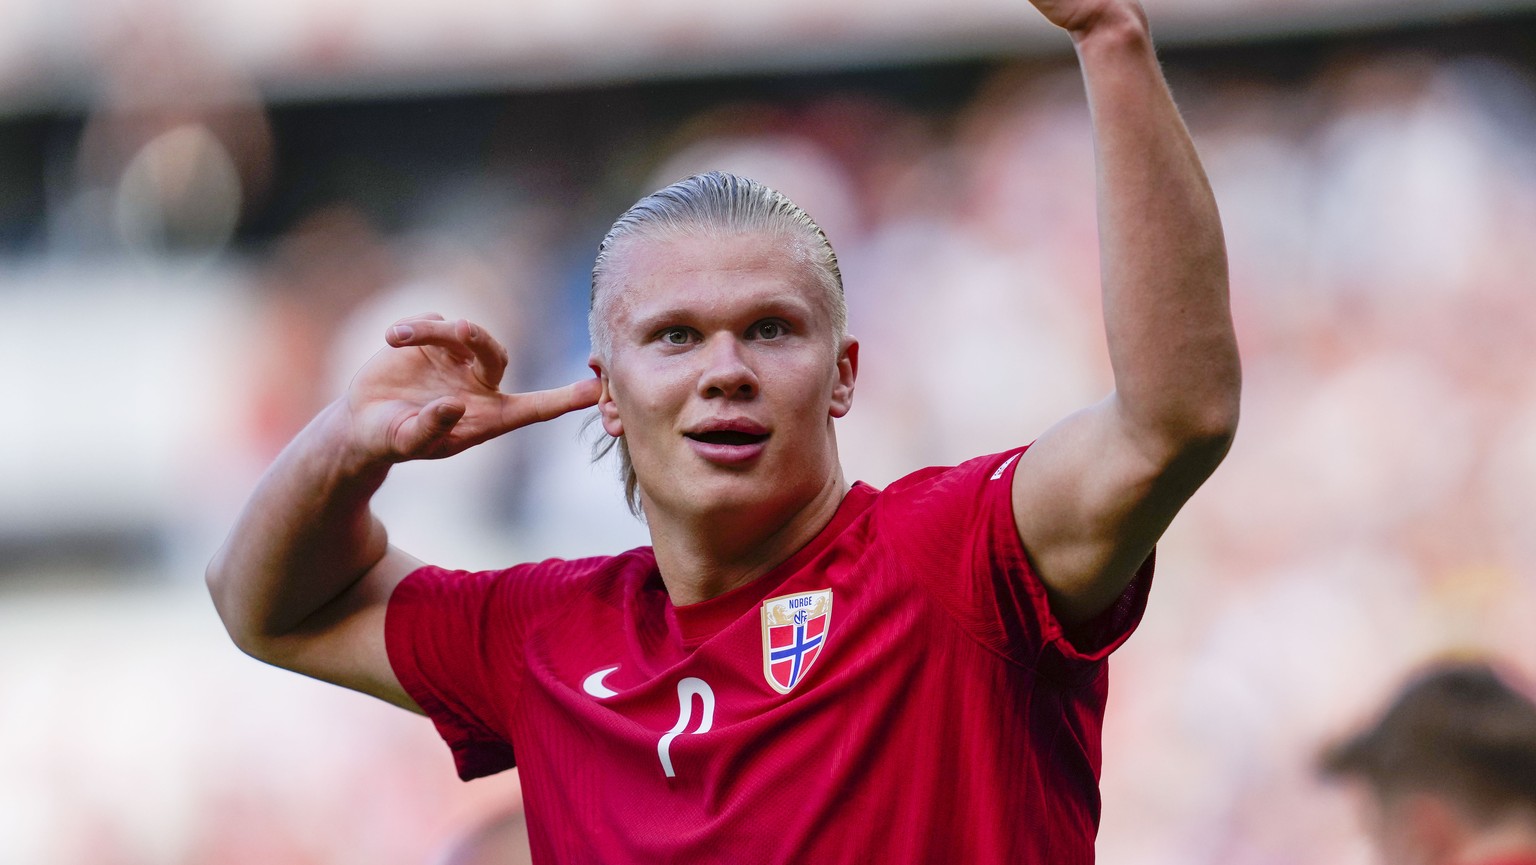 Norway's Erling Braut Haaland celebrates scoring during the Nations League soccer match between Norway and Sweden at Ullevaal Stadium in Oslo, Sunday June 12, 2022. (Javad Parsa/NTB via AP)